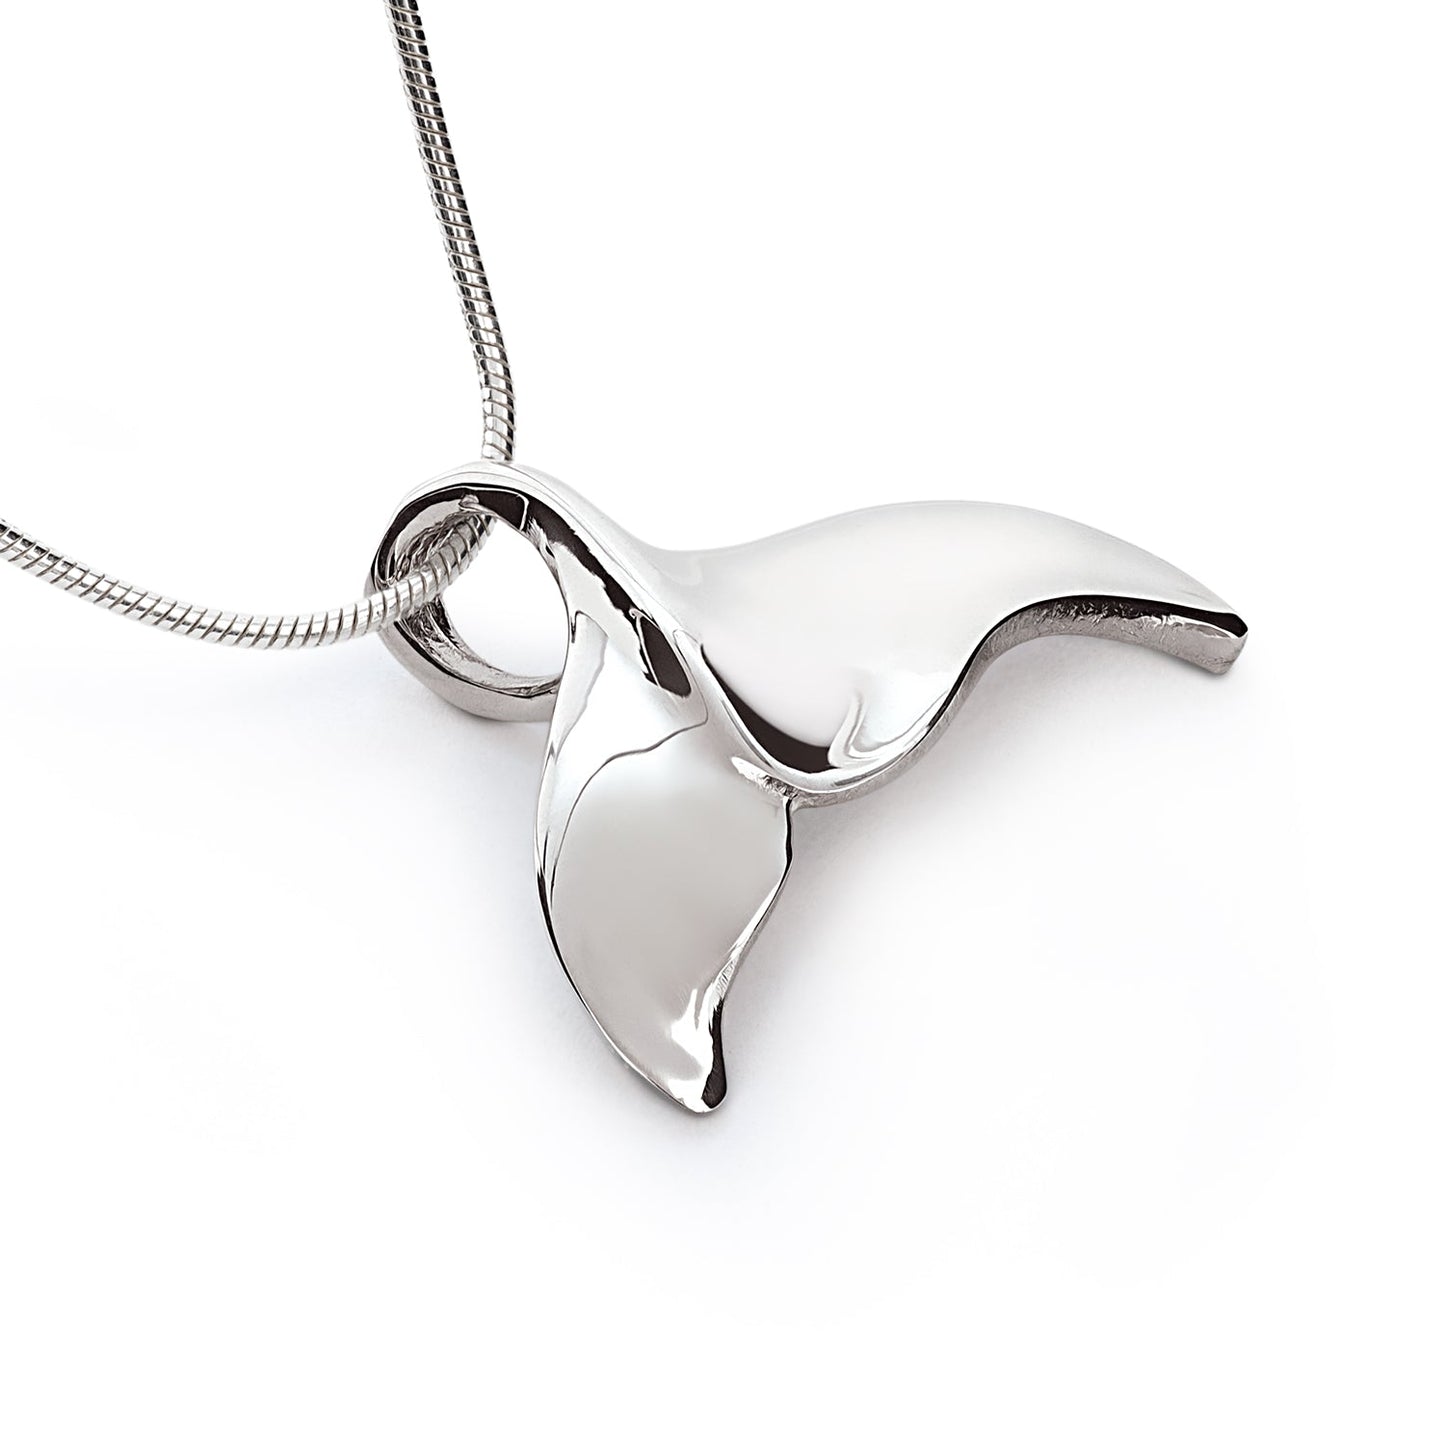 Whale Tail Necklace for Men and Women Sterling Silver- Whale Tail Pendant, Whale Tail Jewelry, Whale Fluke Necklace, Whale Tail Pendant - The Tool Store